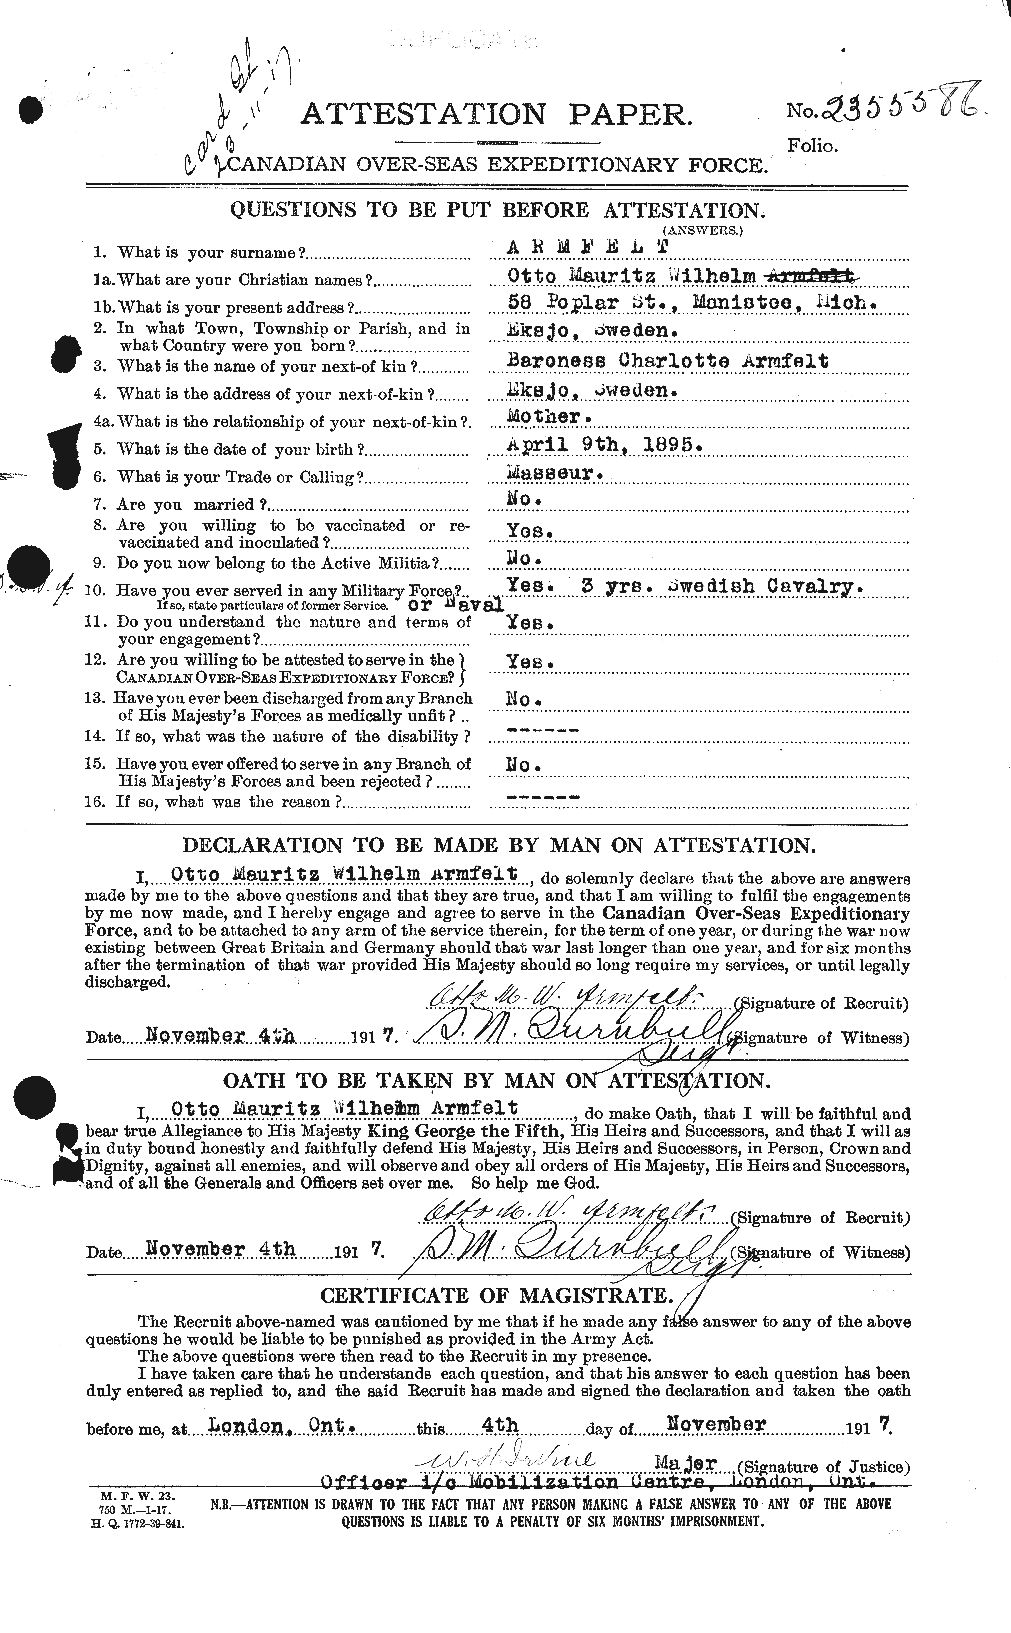 Personnel Records of the First World War - CEF 213476a